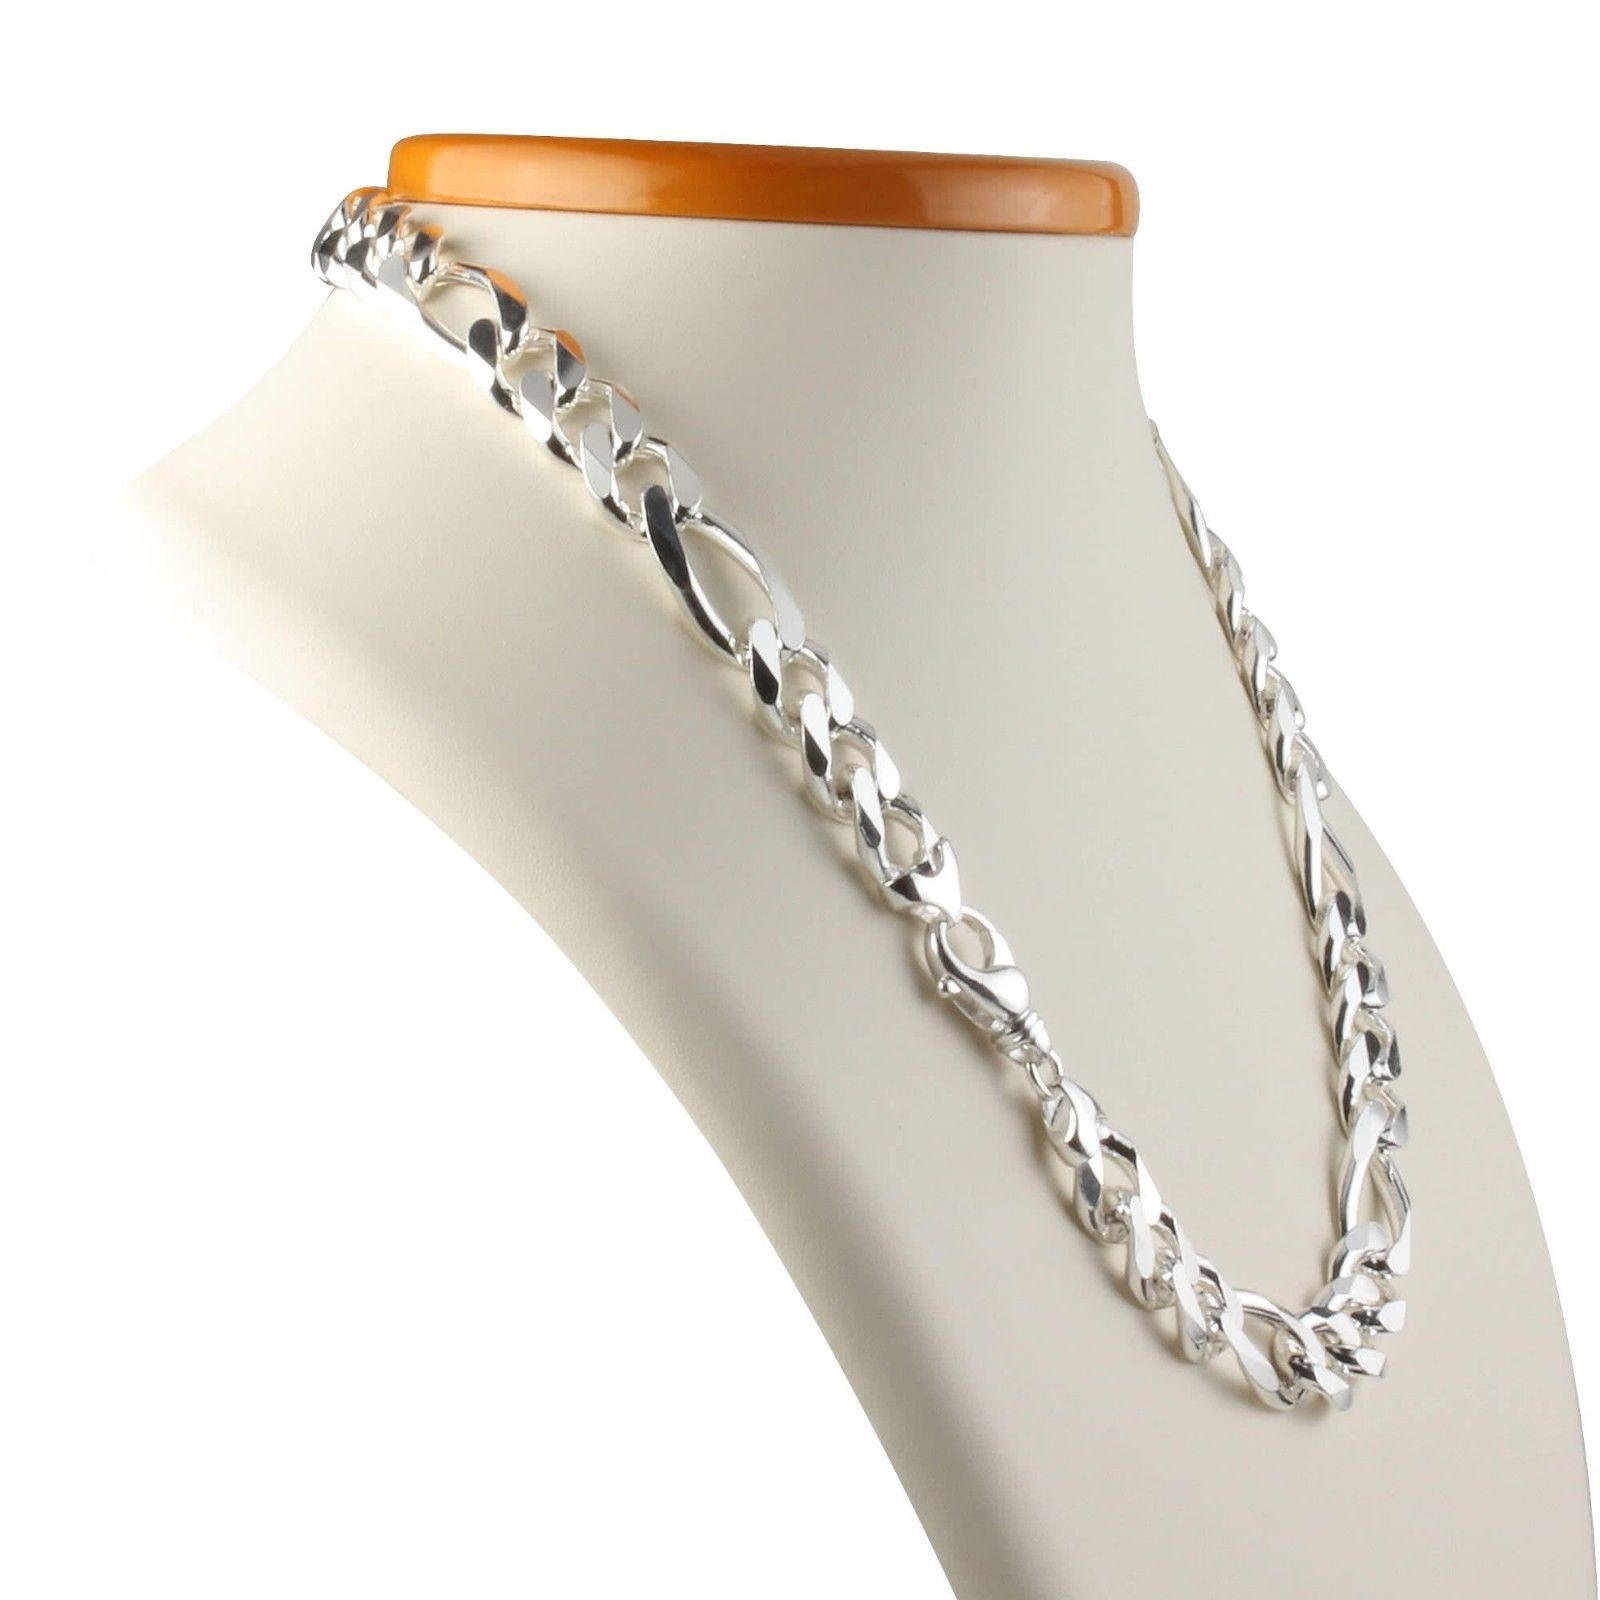 Mens Figaro Hip Hop Chain Necklace Solid 925 Sterling Silver 8mm 65.5 GR 24 inch - 60cm - Image 2 of 2